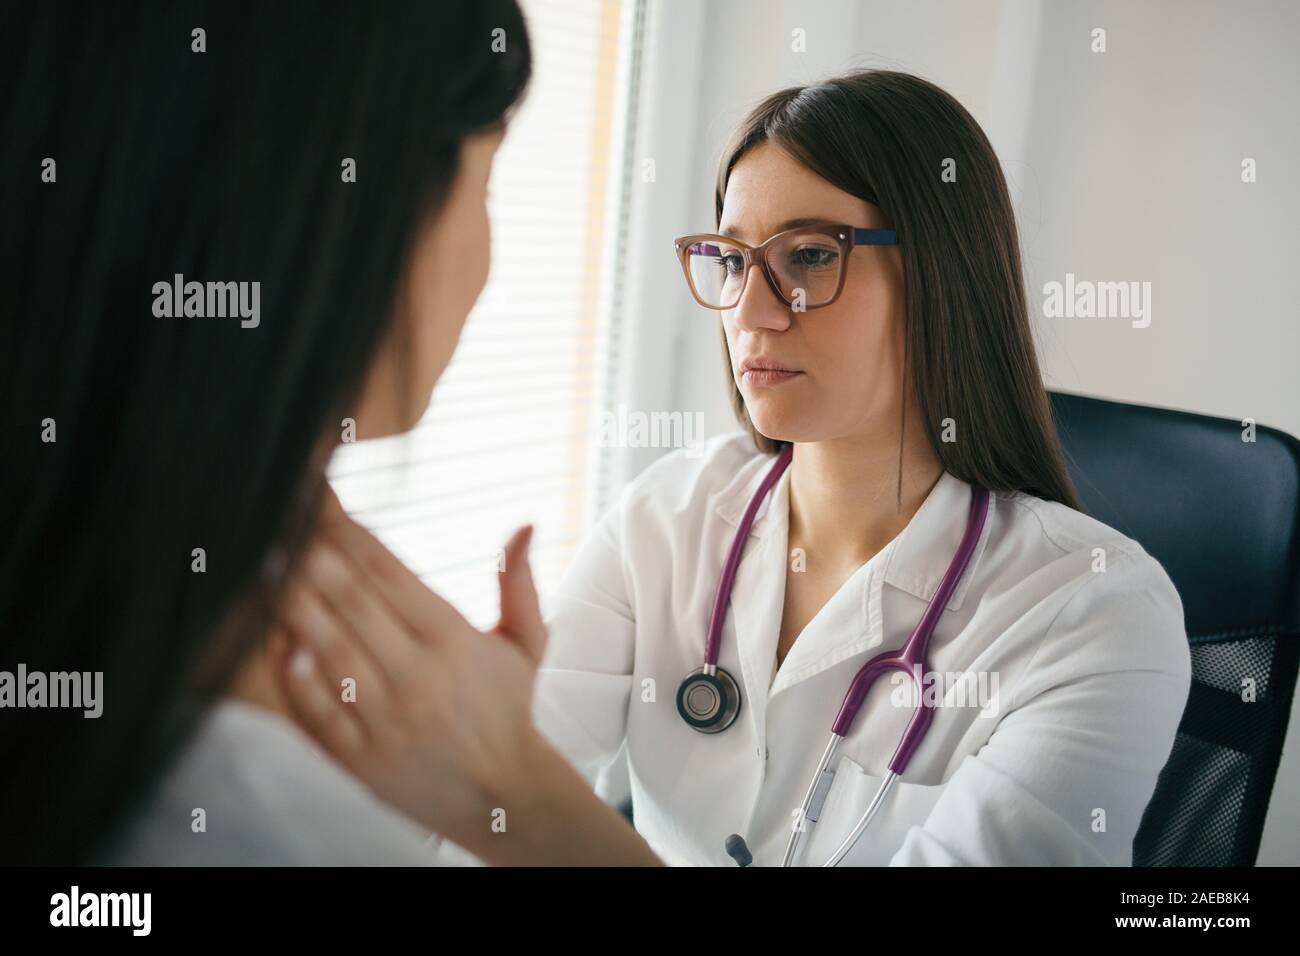 Medical exam. Female doctor palpating lymph nodes of a patient Stock Photo